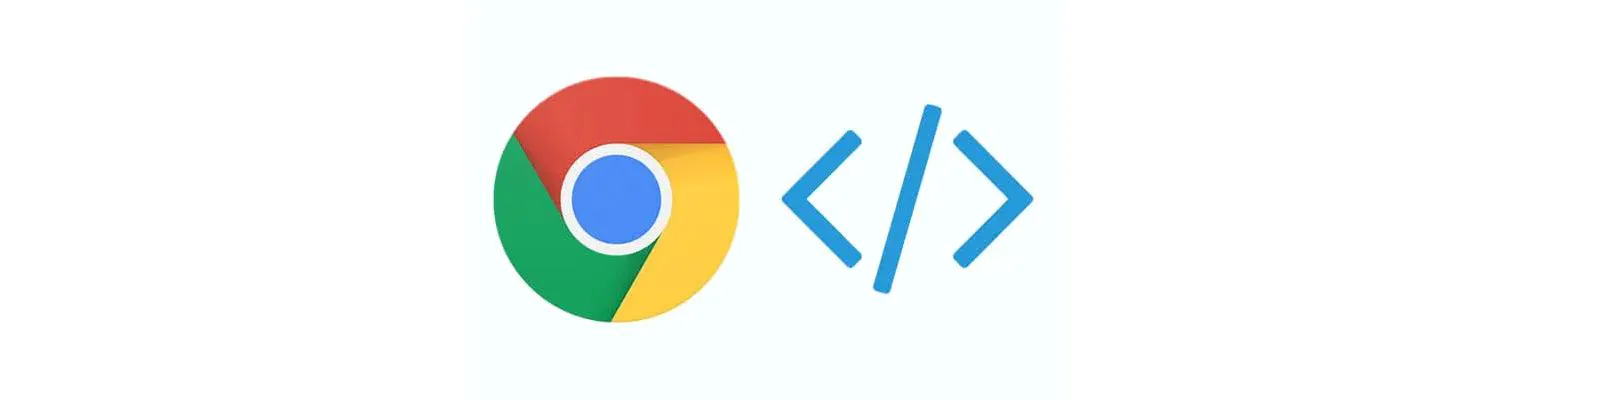 Useful Features of Chrome Dev Tools